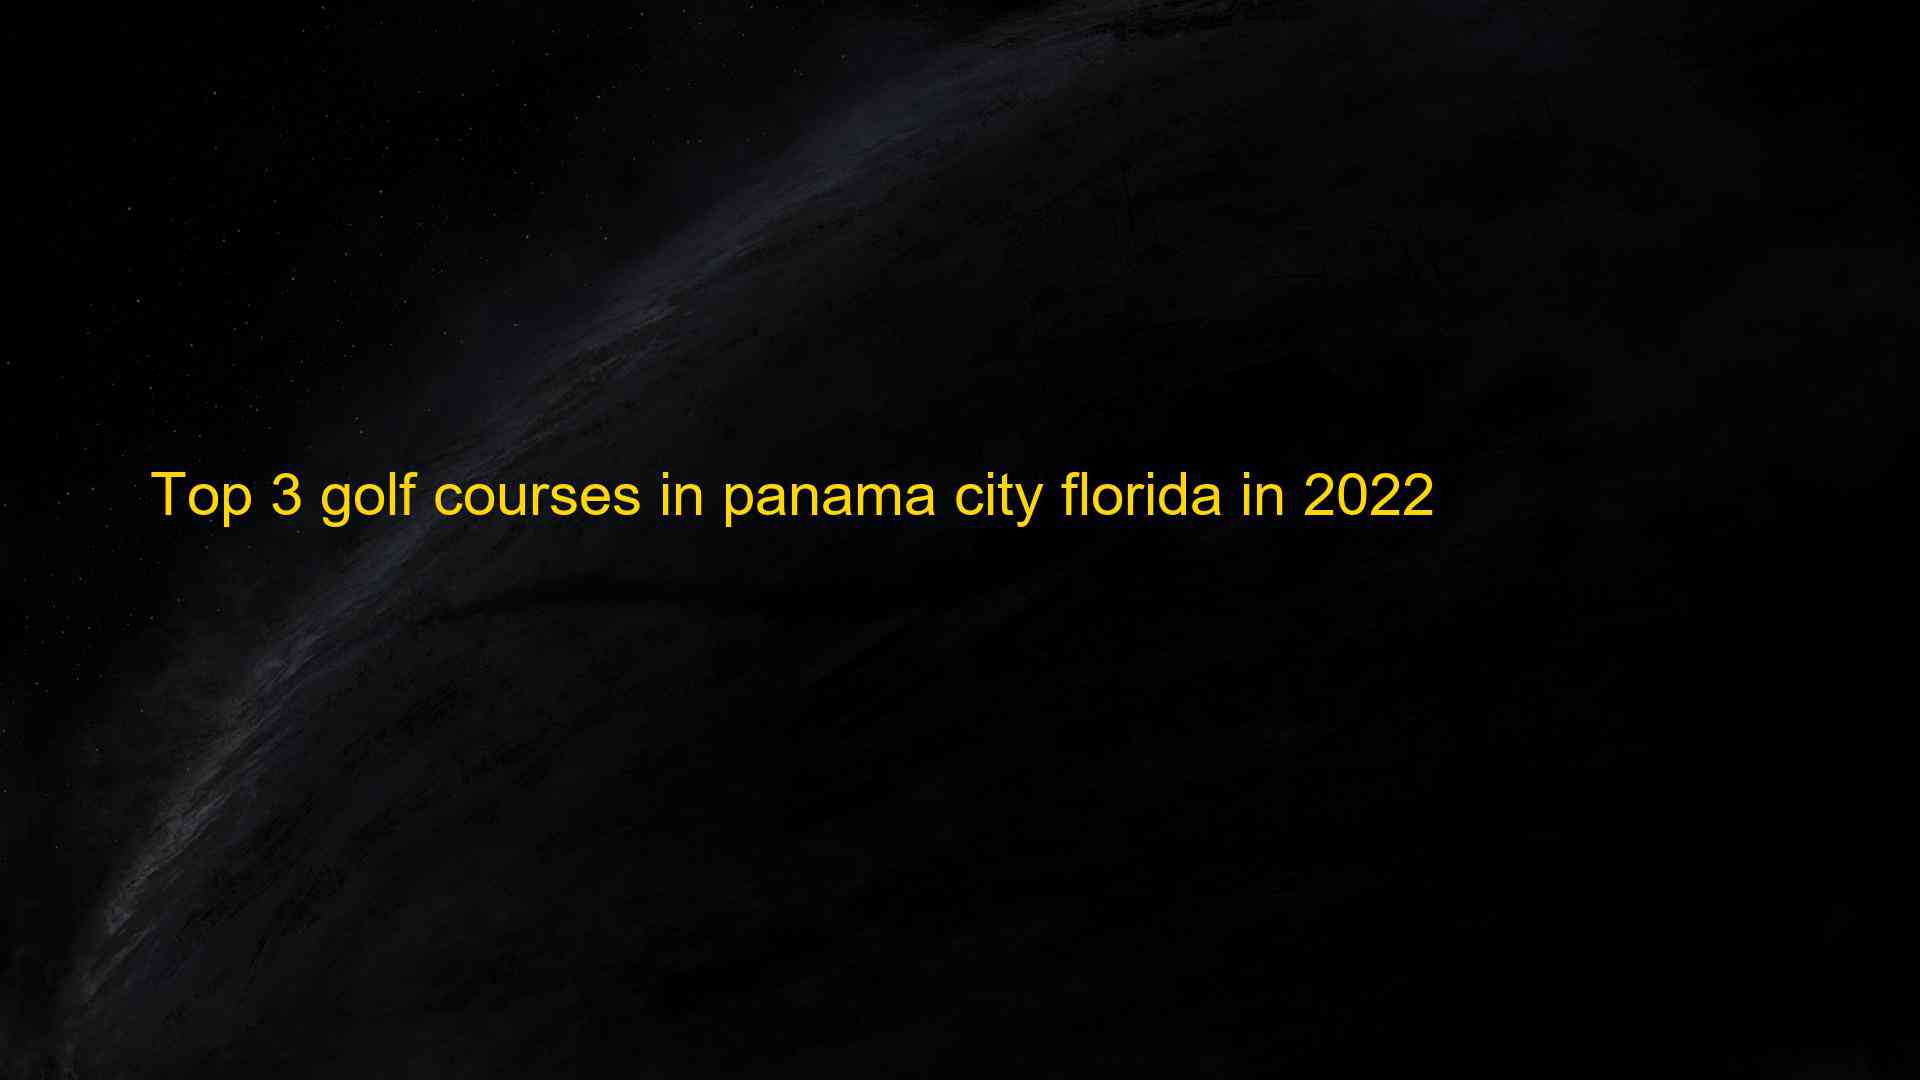 Top 3 golf courses in panama city florida in 2022 1660991438